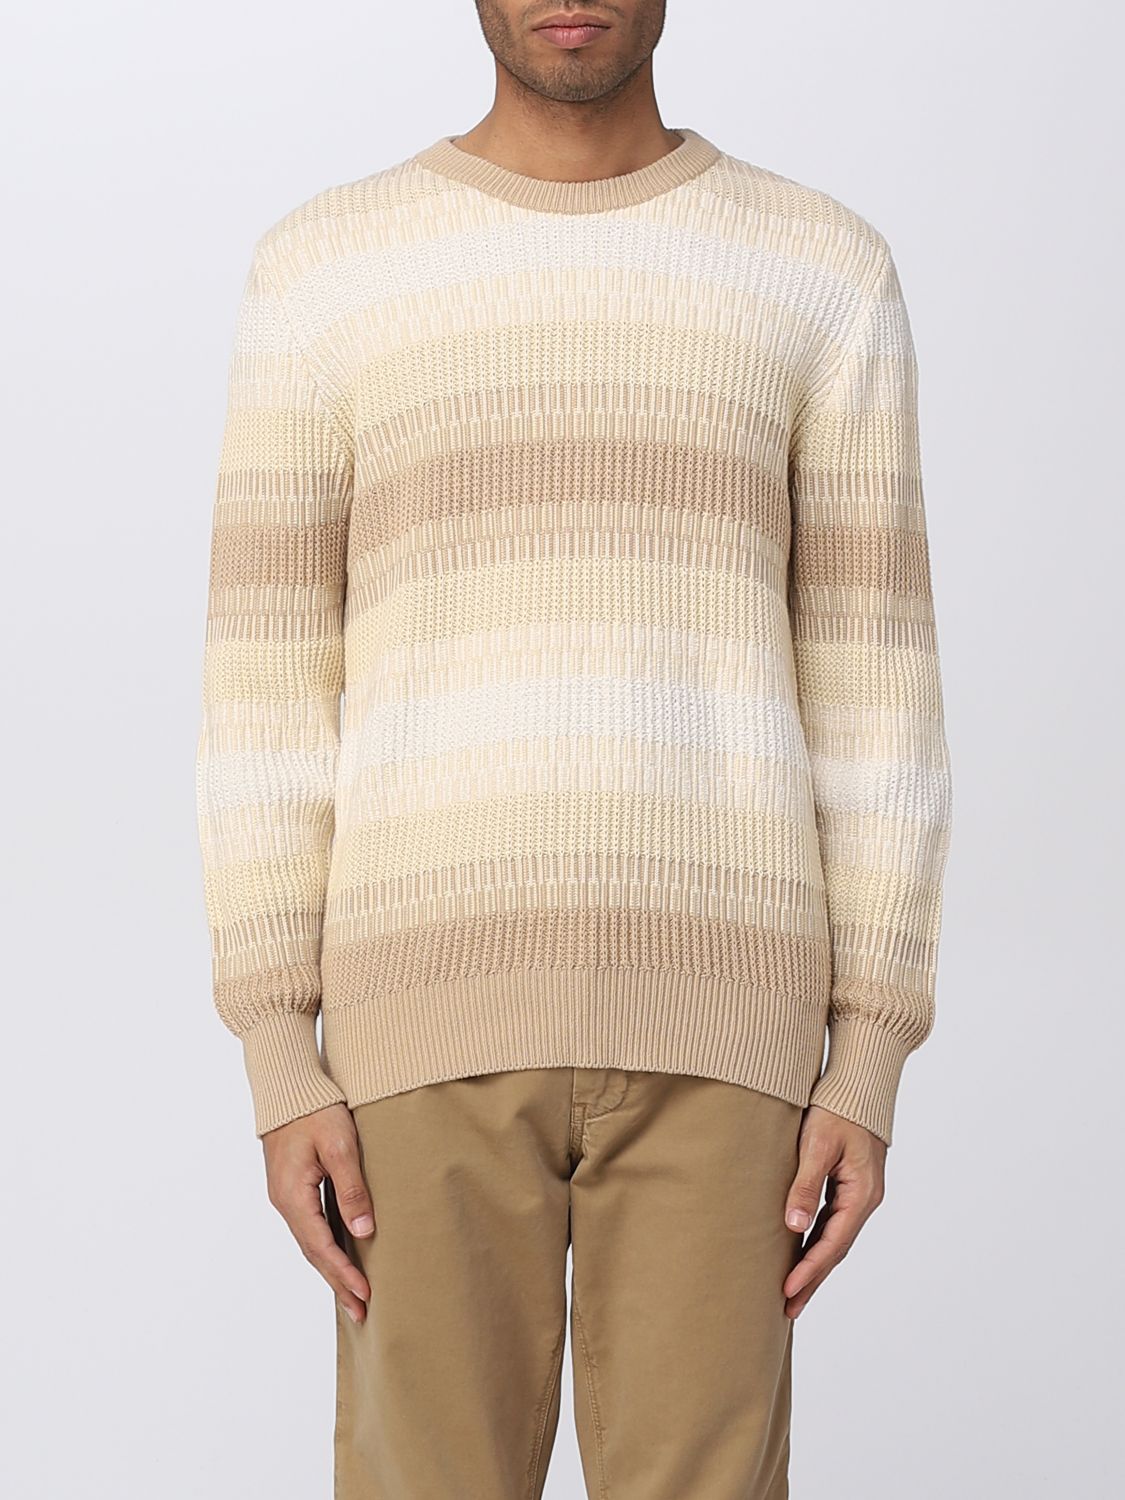 Altea Striped Knitted Jumper In Natural